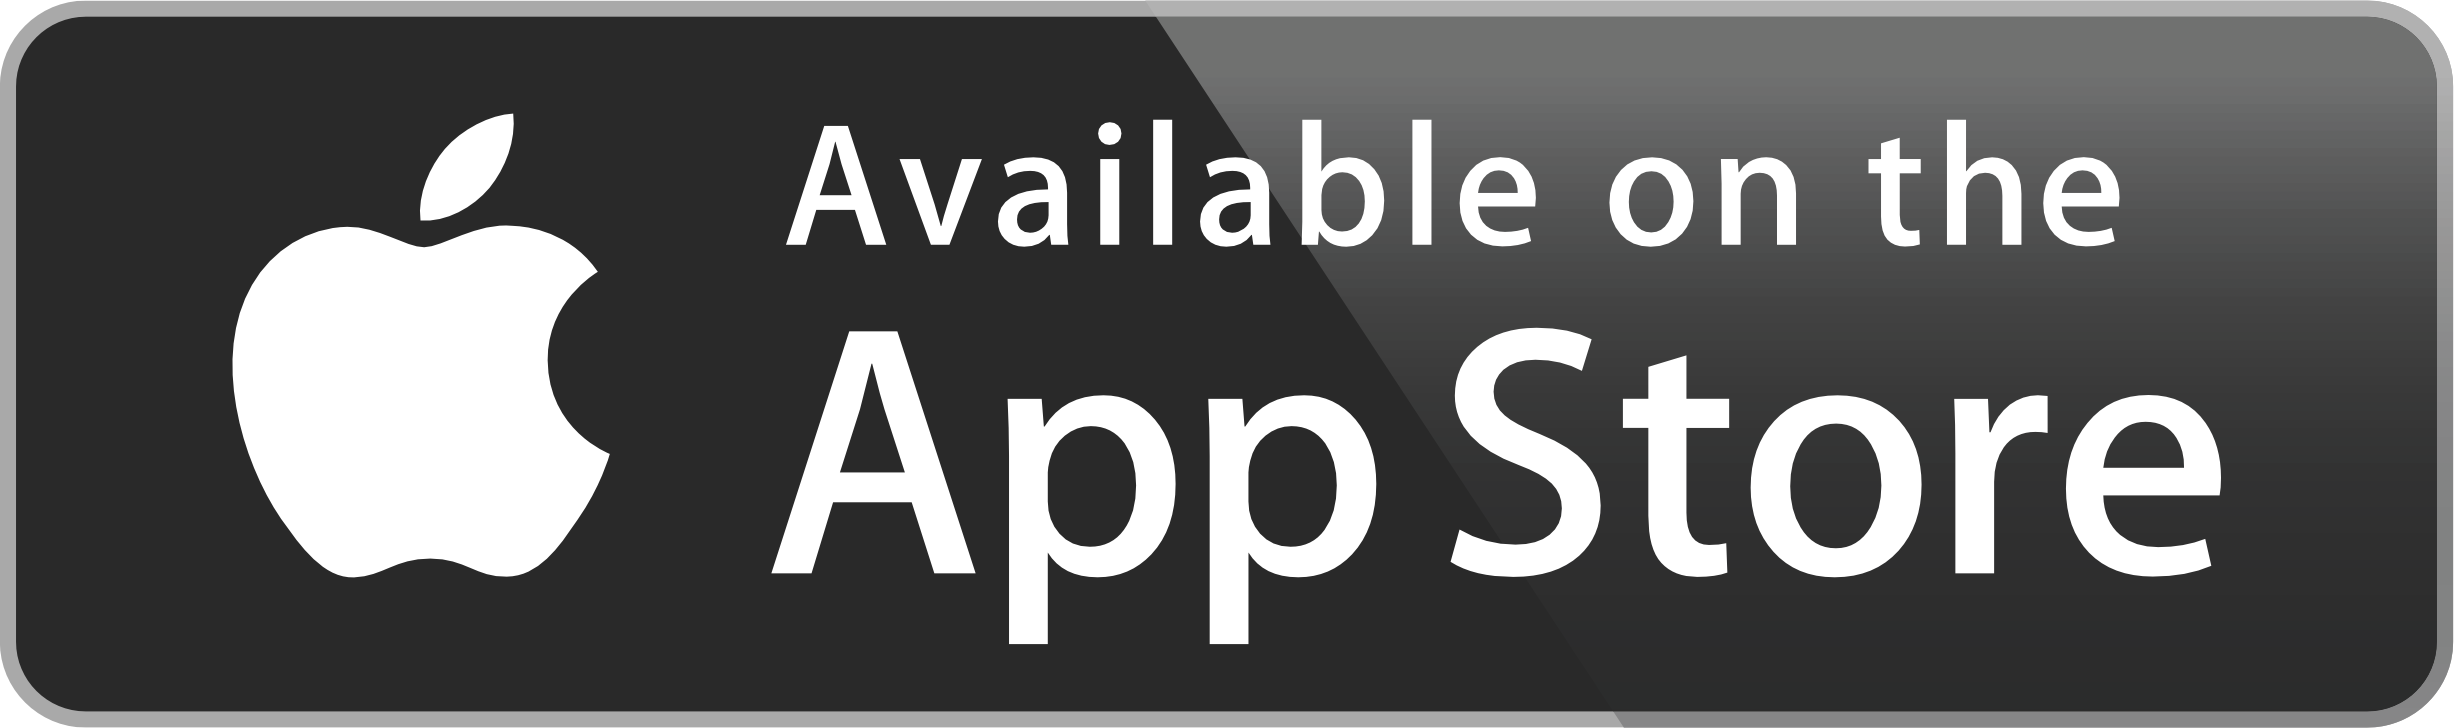 Available on the App Store Button